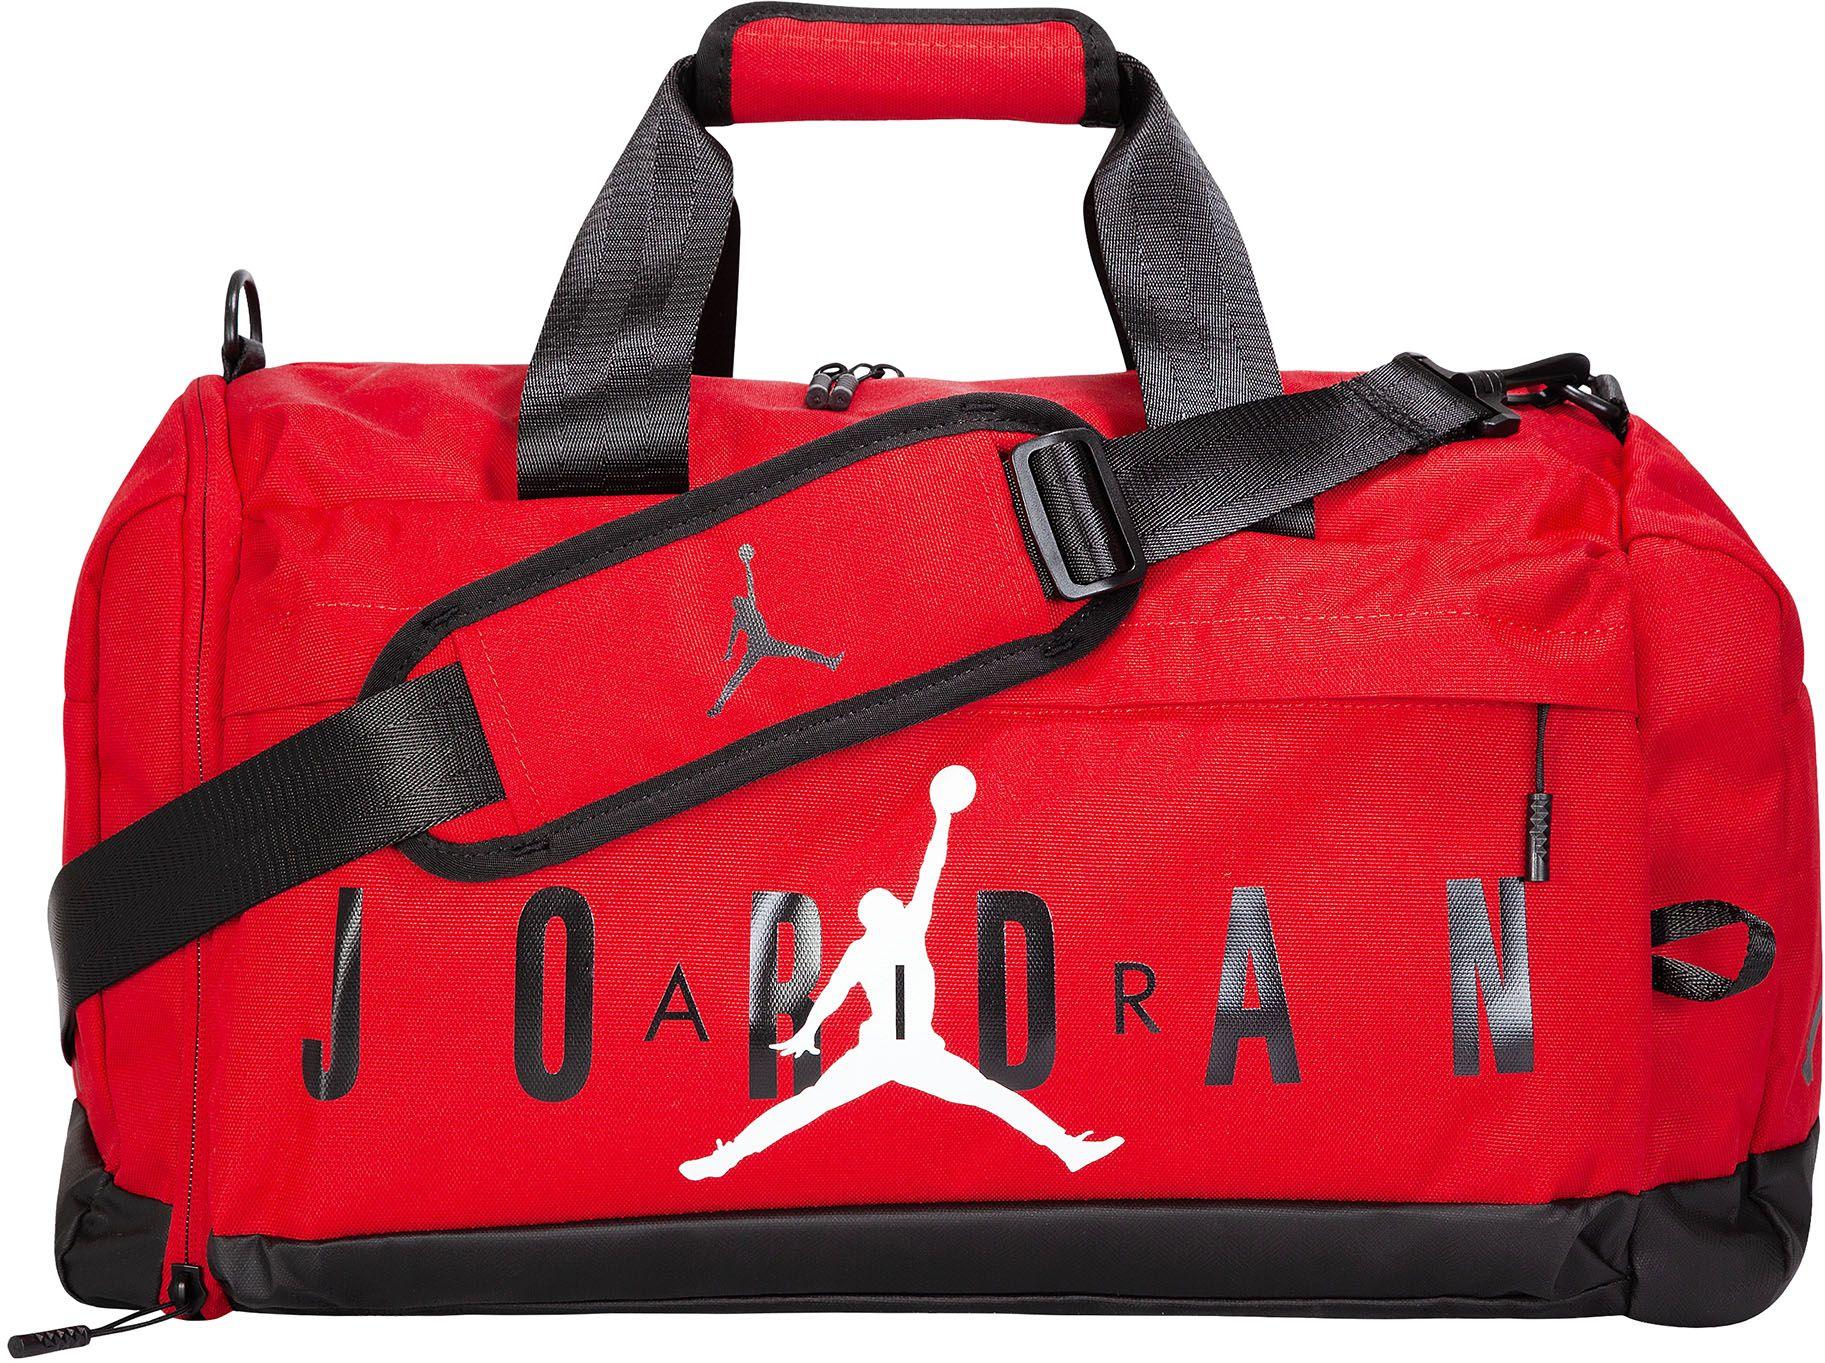 Lyst - Nike Velocity Duffle Bag in Red